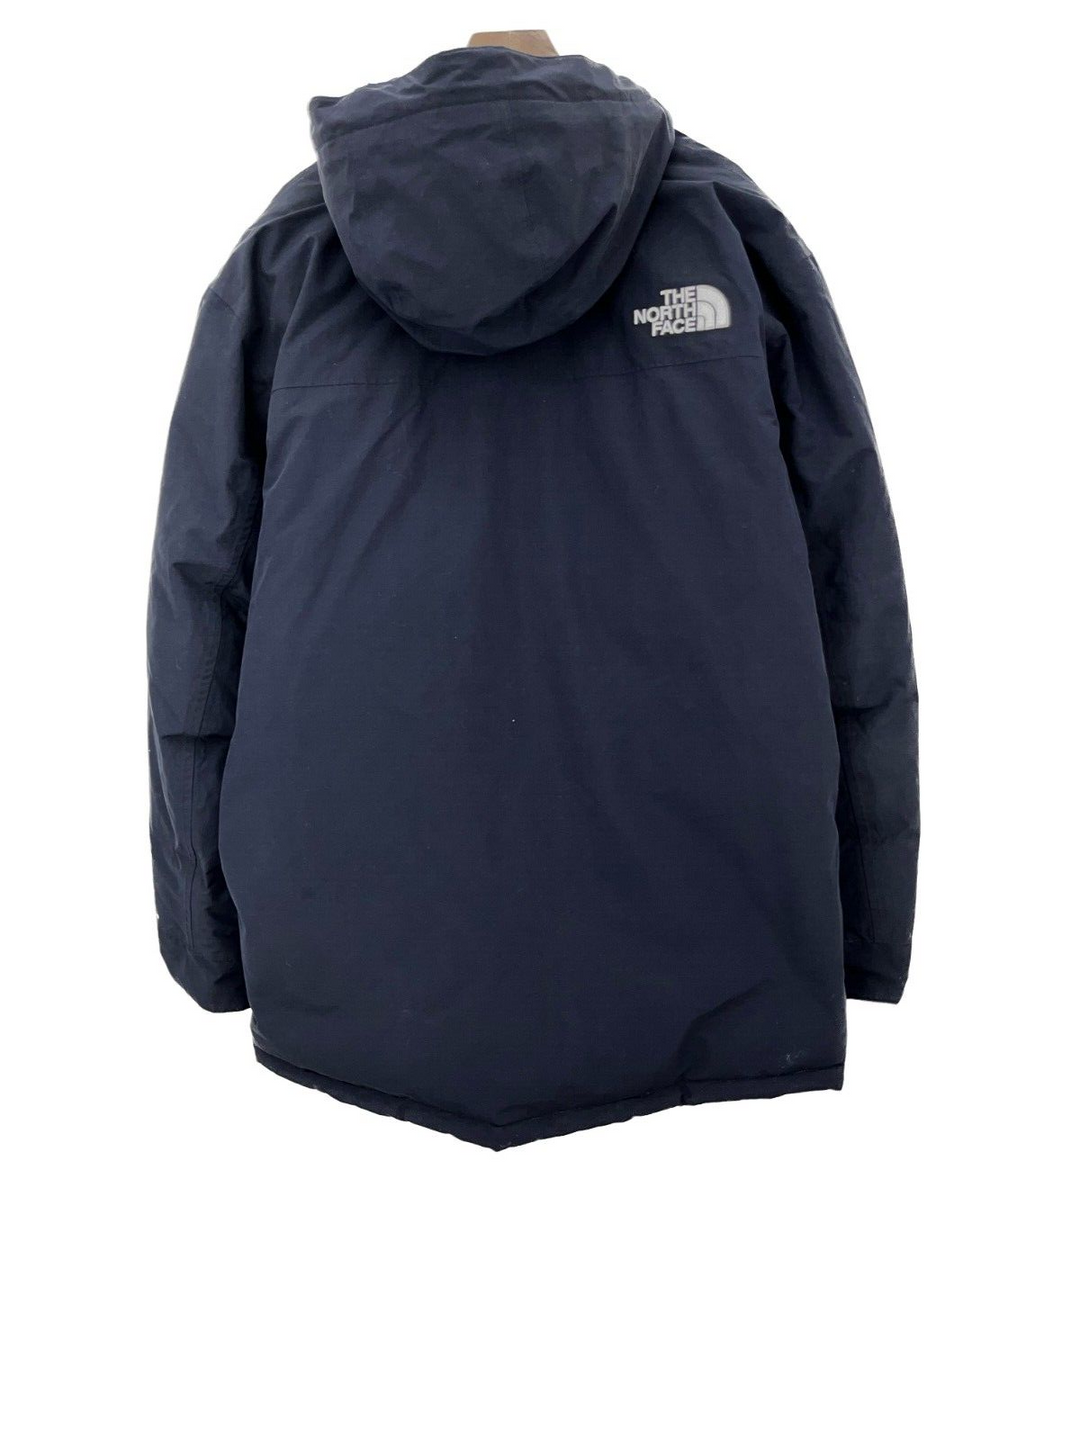 Vintage The North Face 550 Full Zip Navy Blue Insulated Hooded Jacket Size L